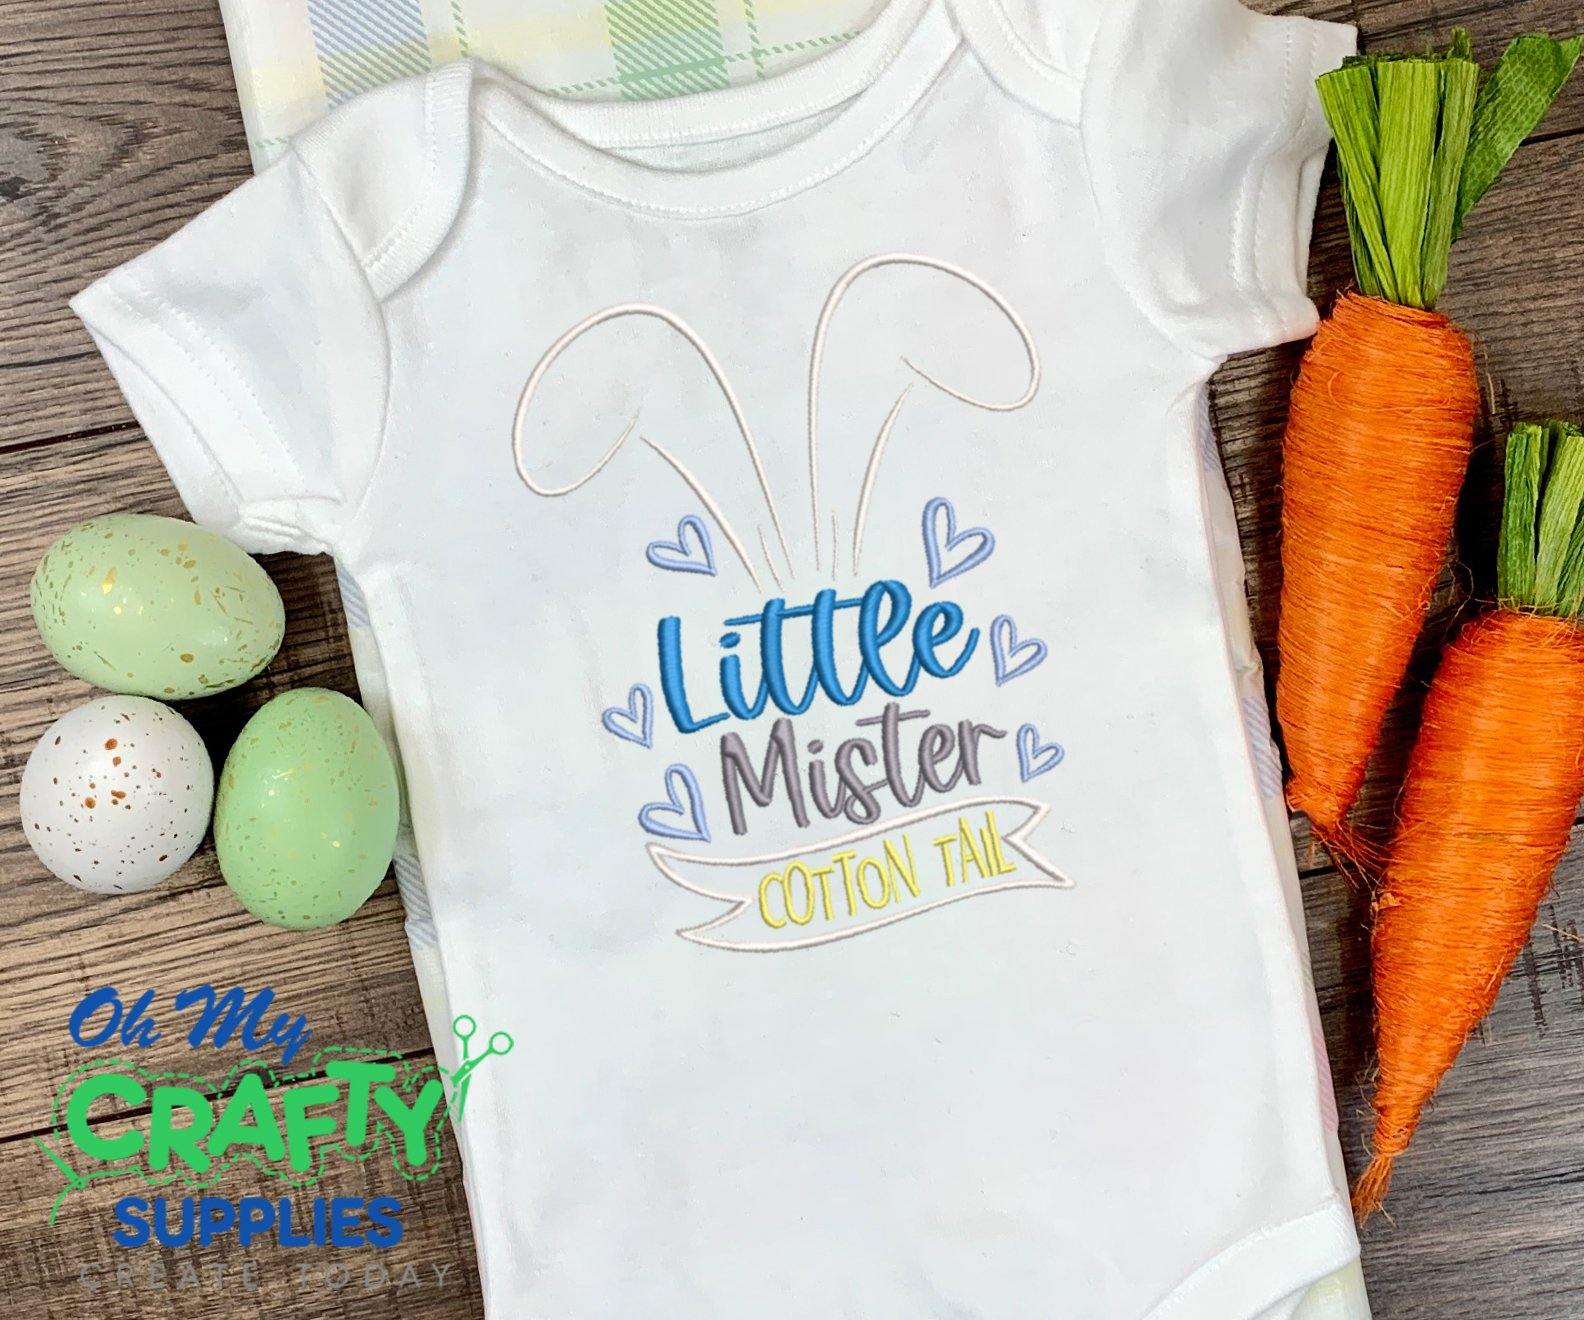 Little Mister Cotton Tail Embroidery design - Oh My Crafty Supplies Inc.